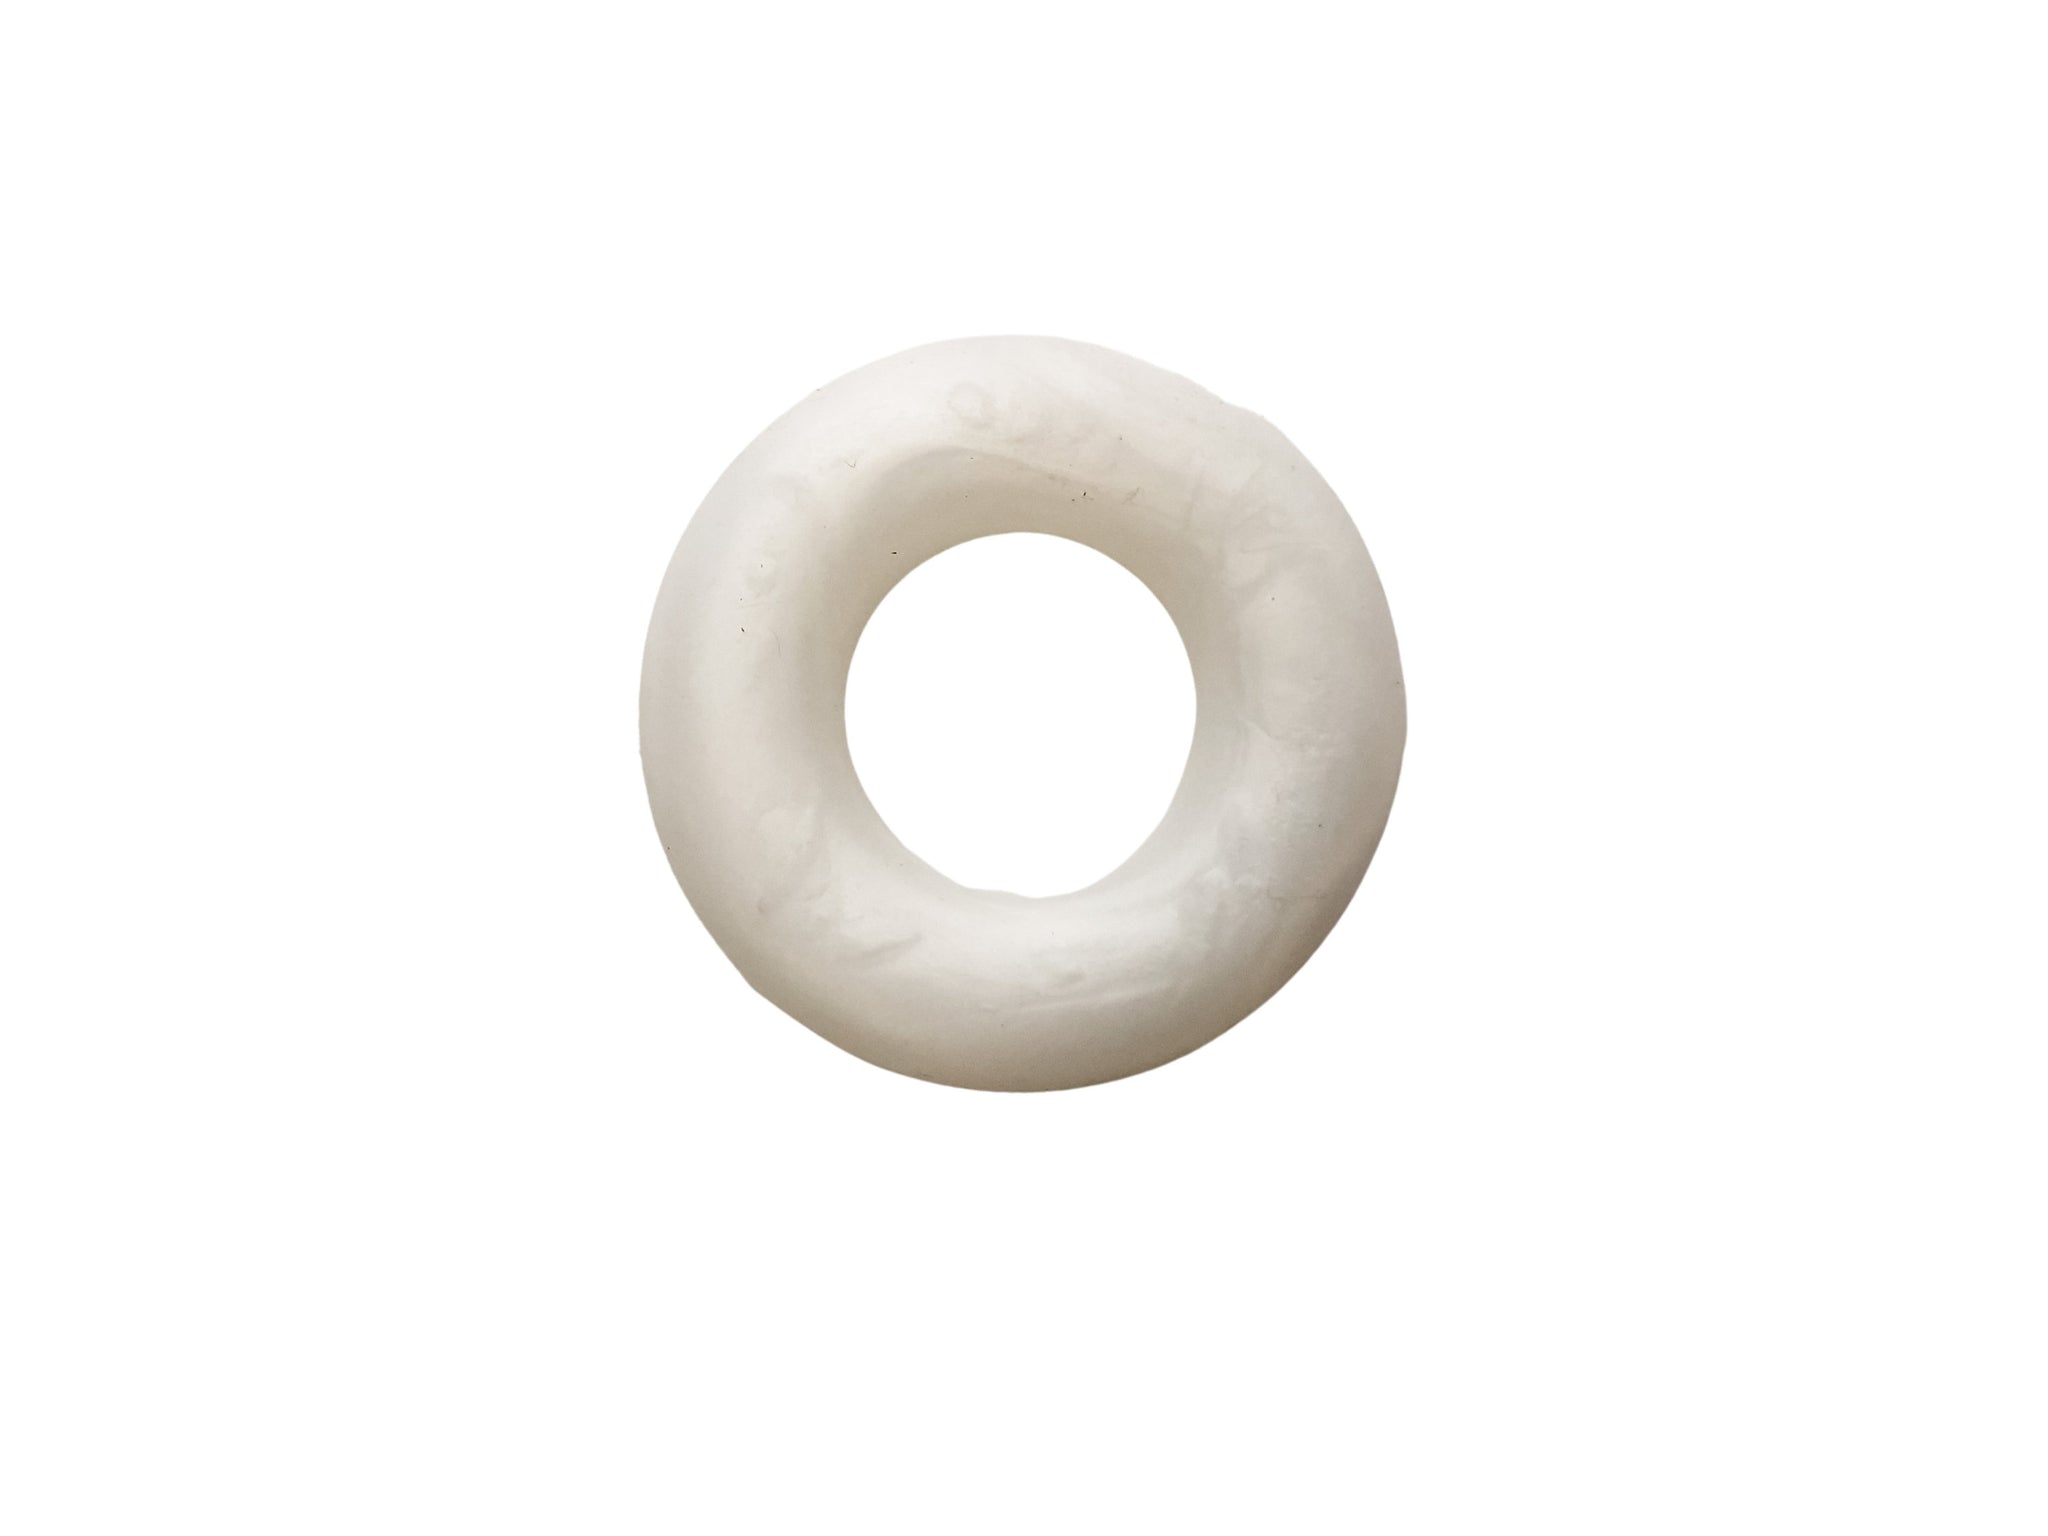 Pearl Silicone Ring Beads Pendant - Metallic White - Seamless Silicone Donut Beads